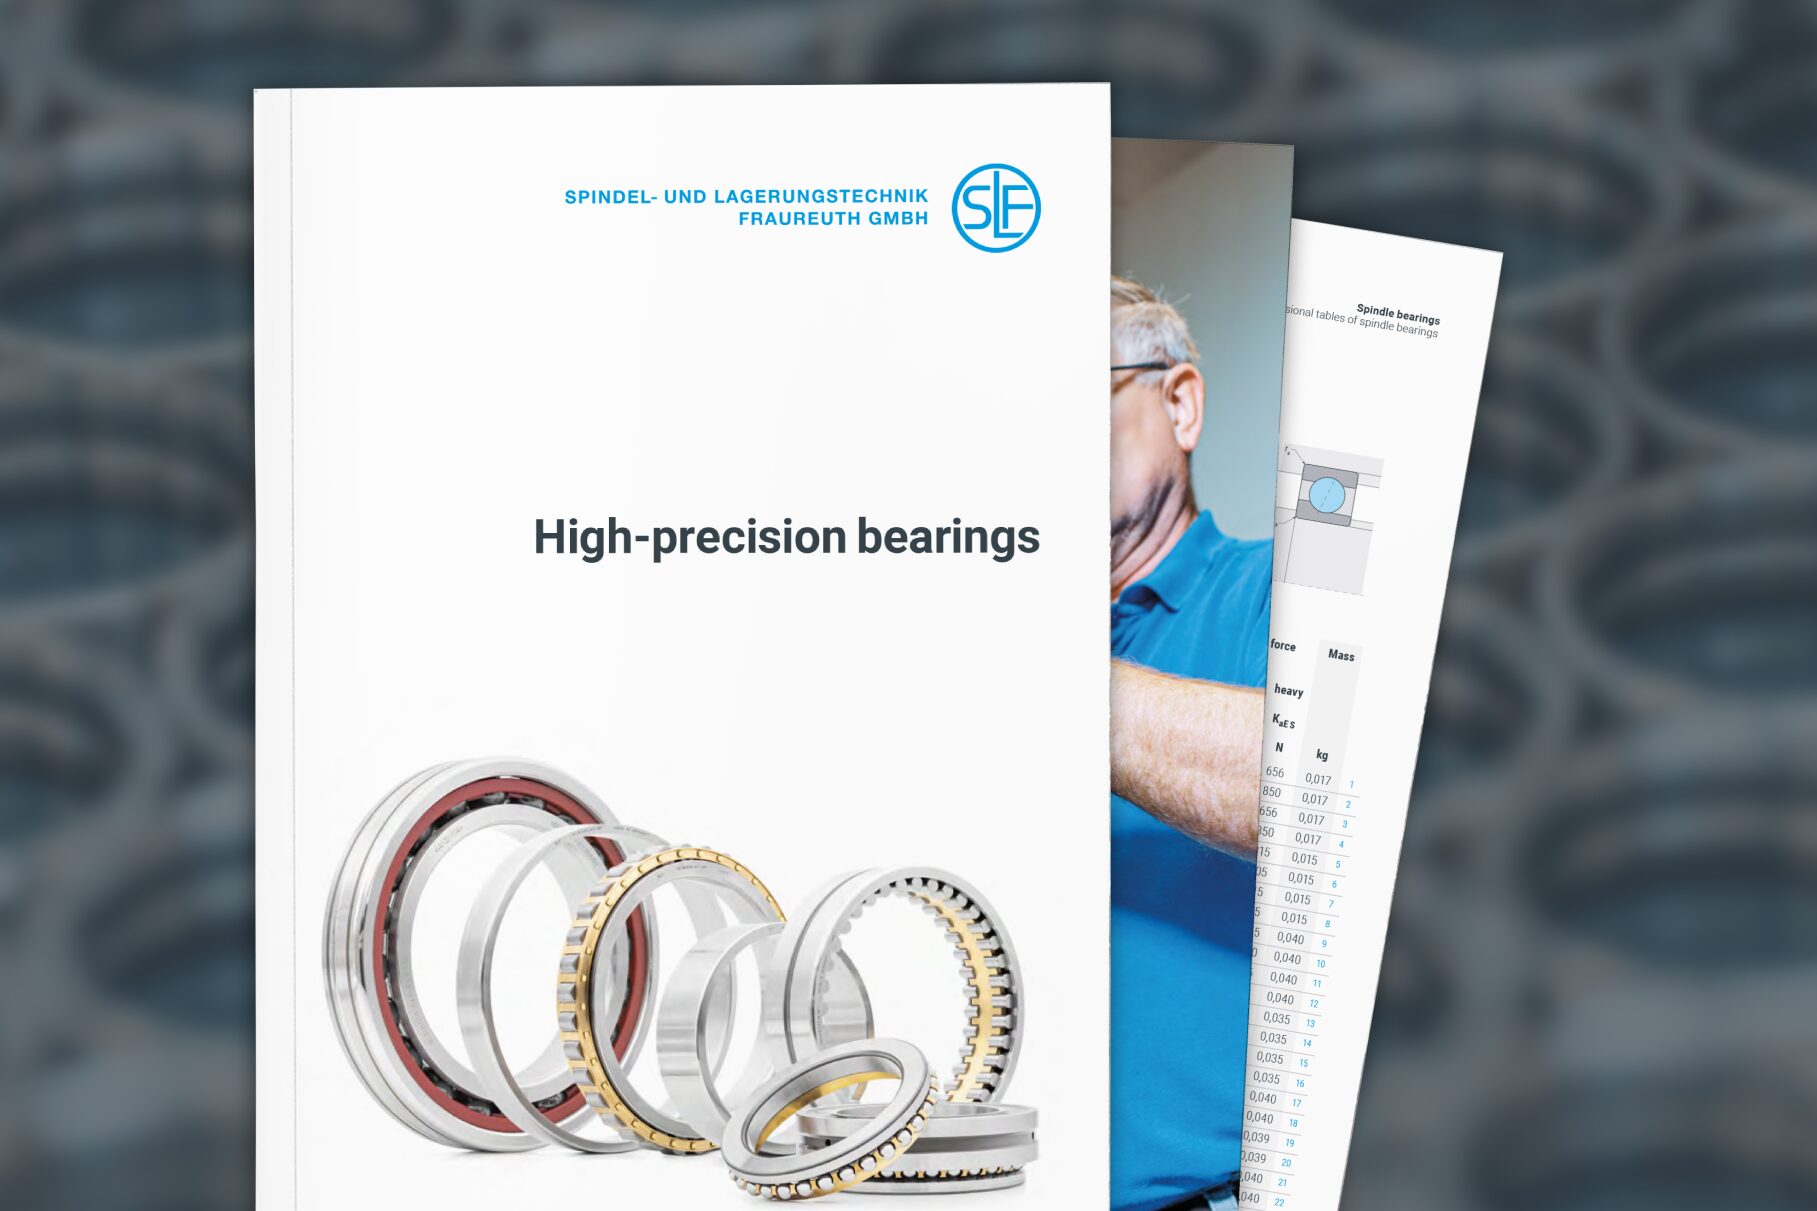 The new high-precision bearings product catalogue from SLF Fraureuth is illustrated against a background of various bearings.